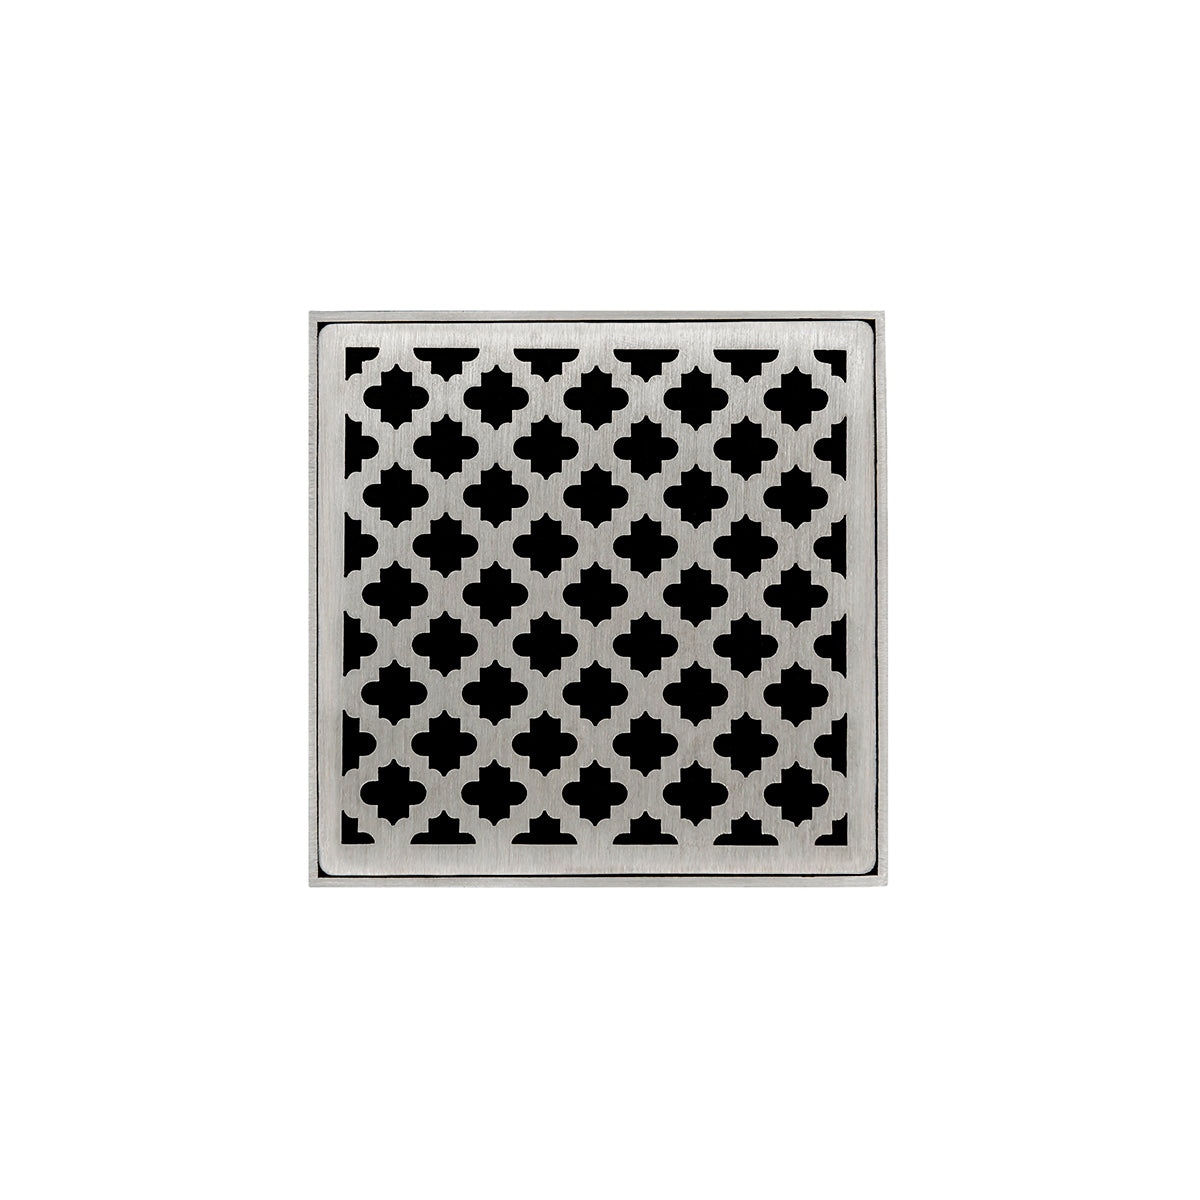 Infinity Drain 4" x 4" MDB 4 Premium Center Drain Kit with Moor Pattern Decorative Plate with PVC Bonded Flange Drain Body, 2", 3" and 4" Outlet